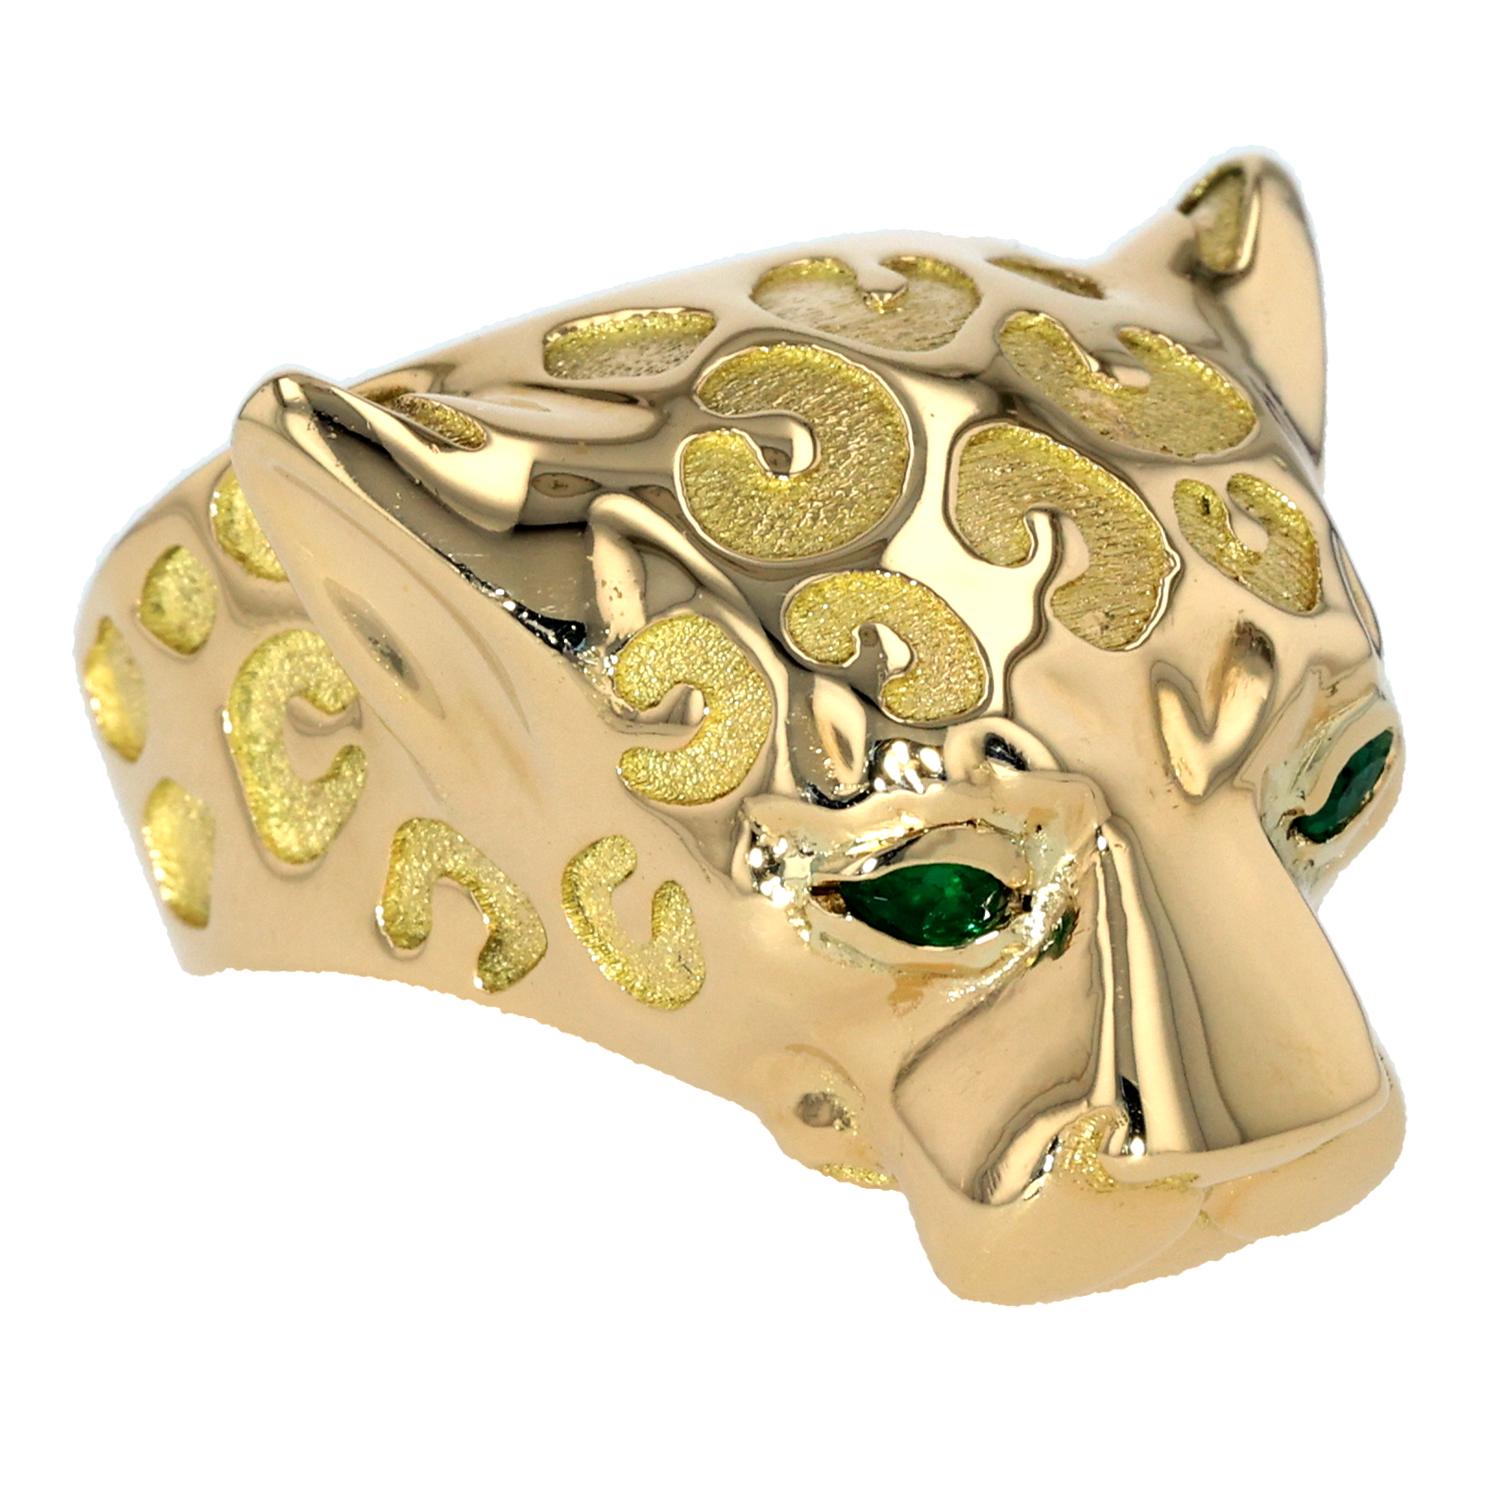 The 18K Yellow Gold Jaguar Ring by Tane is an exquisite piece that captures the essence of luxury and daring design. Crafted from polished 18K yellow gold, this ring features the sculpted form of a jaguar, complete with piercing emerald eyes that